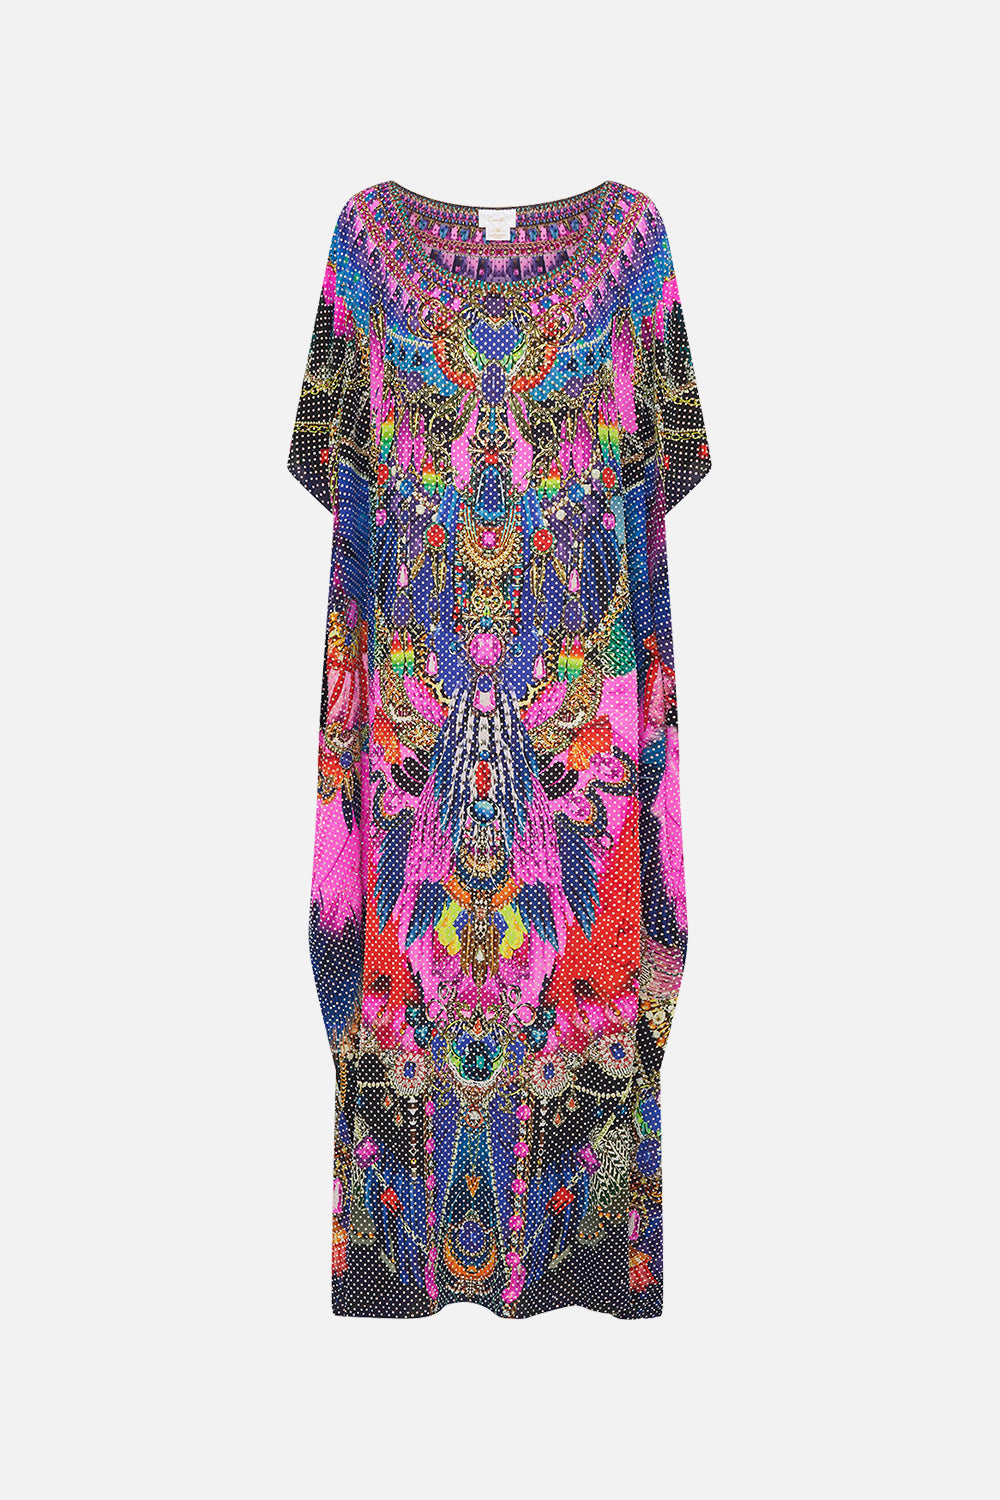 LUXE EMBELLISHED ROUND NECK KAFTAN DANCING WITH DESTINY